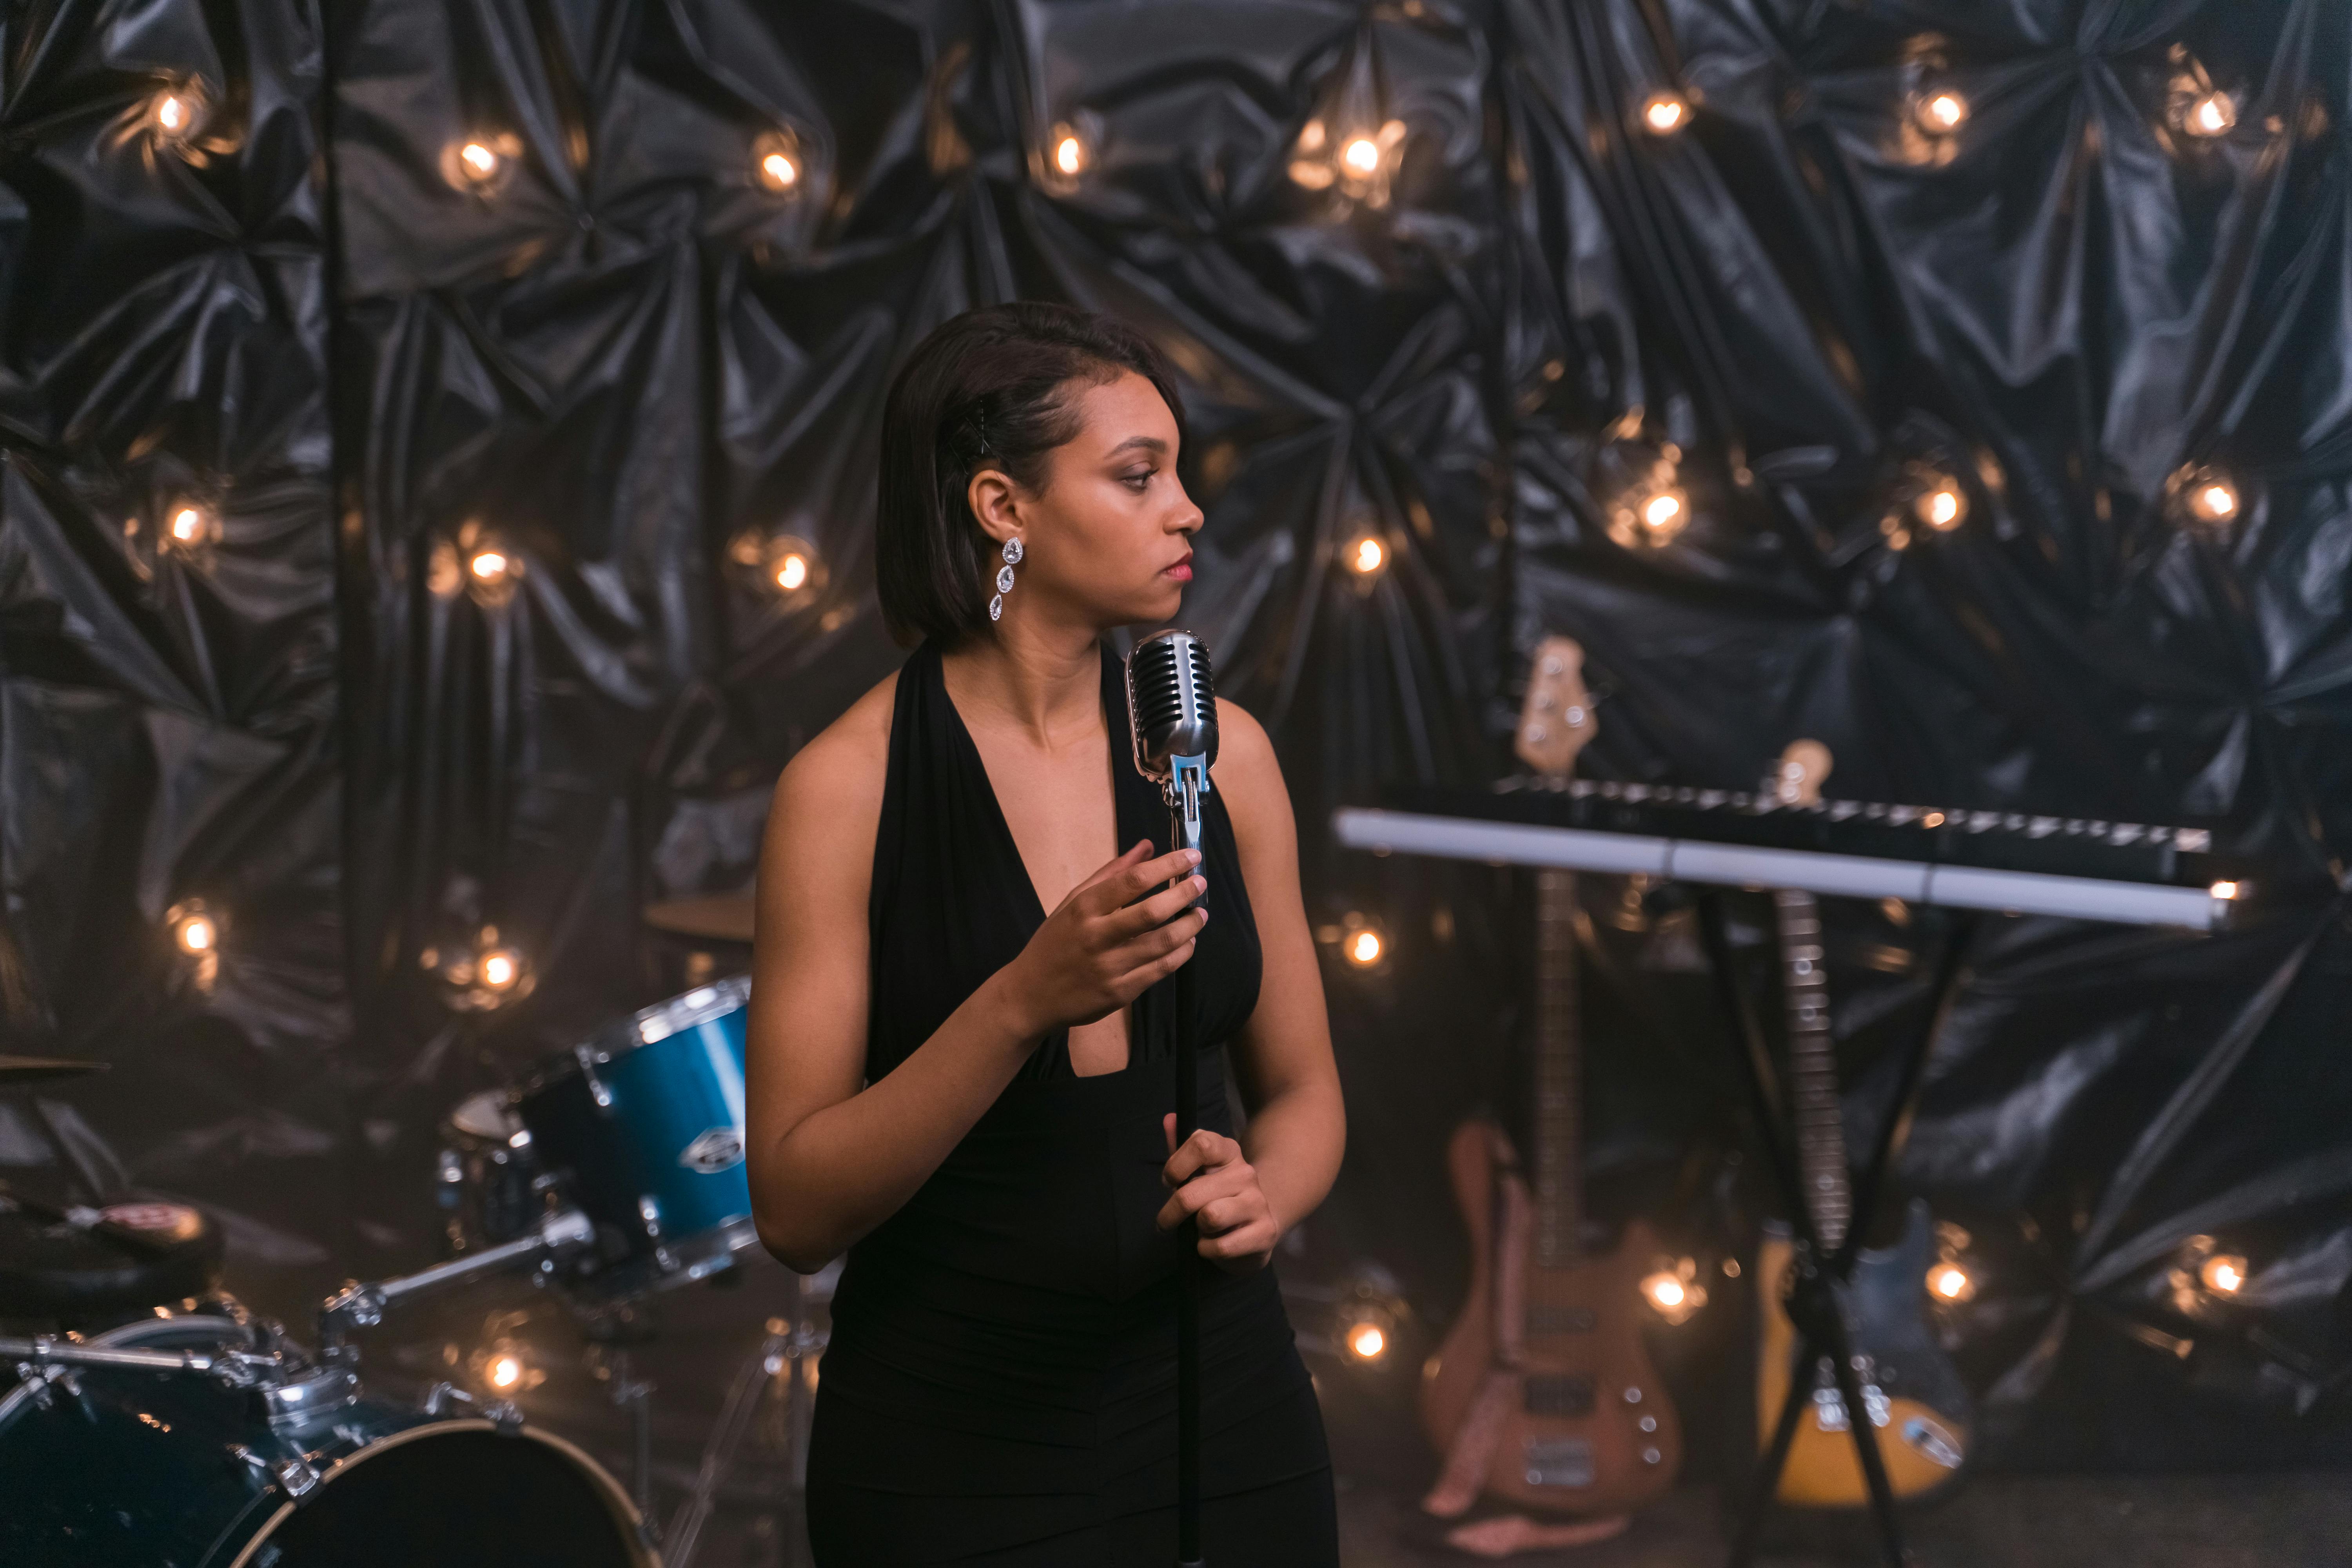 A woman speaking on a microphone on stage | Source: Pexels